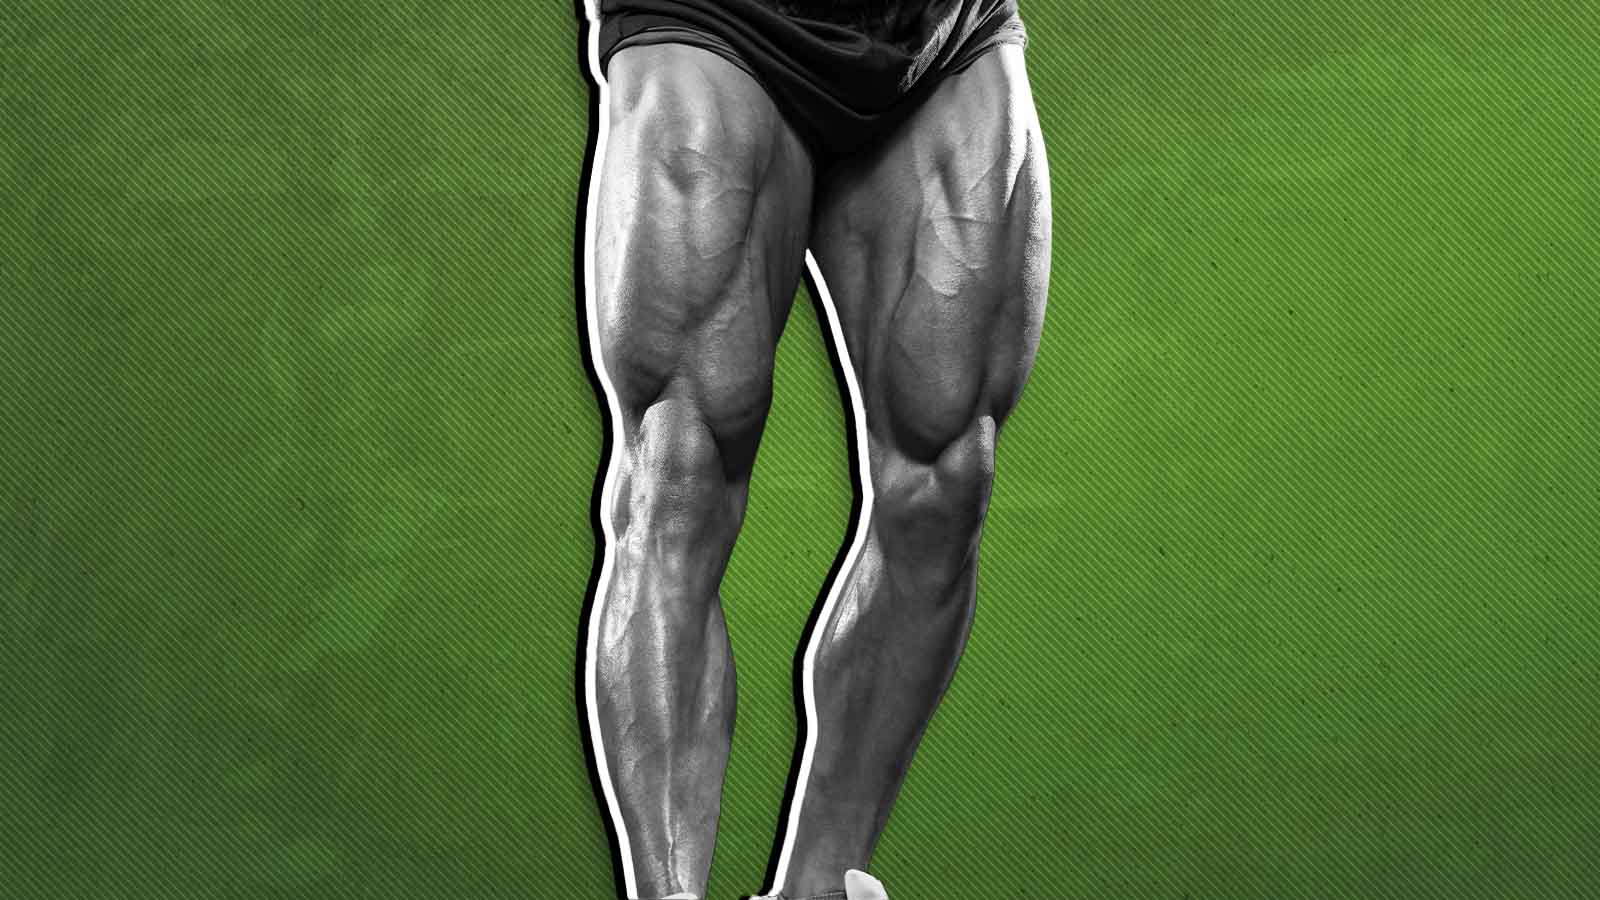 Leg Muscles - Definition, Parts, Anatomy & their Functions